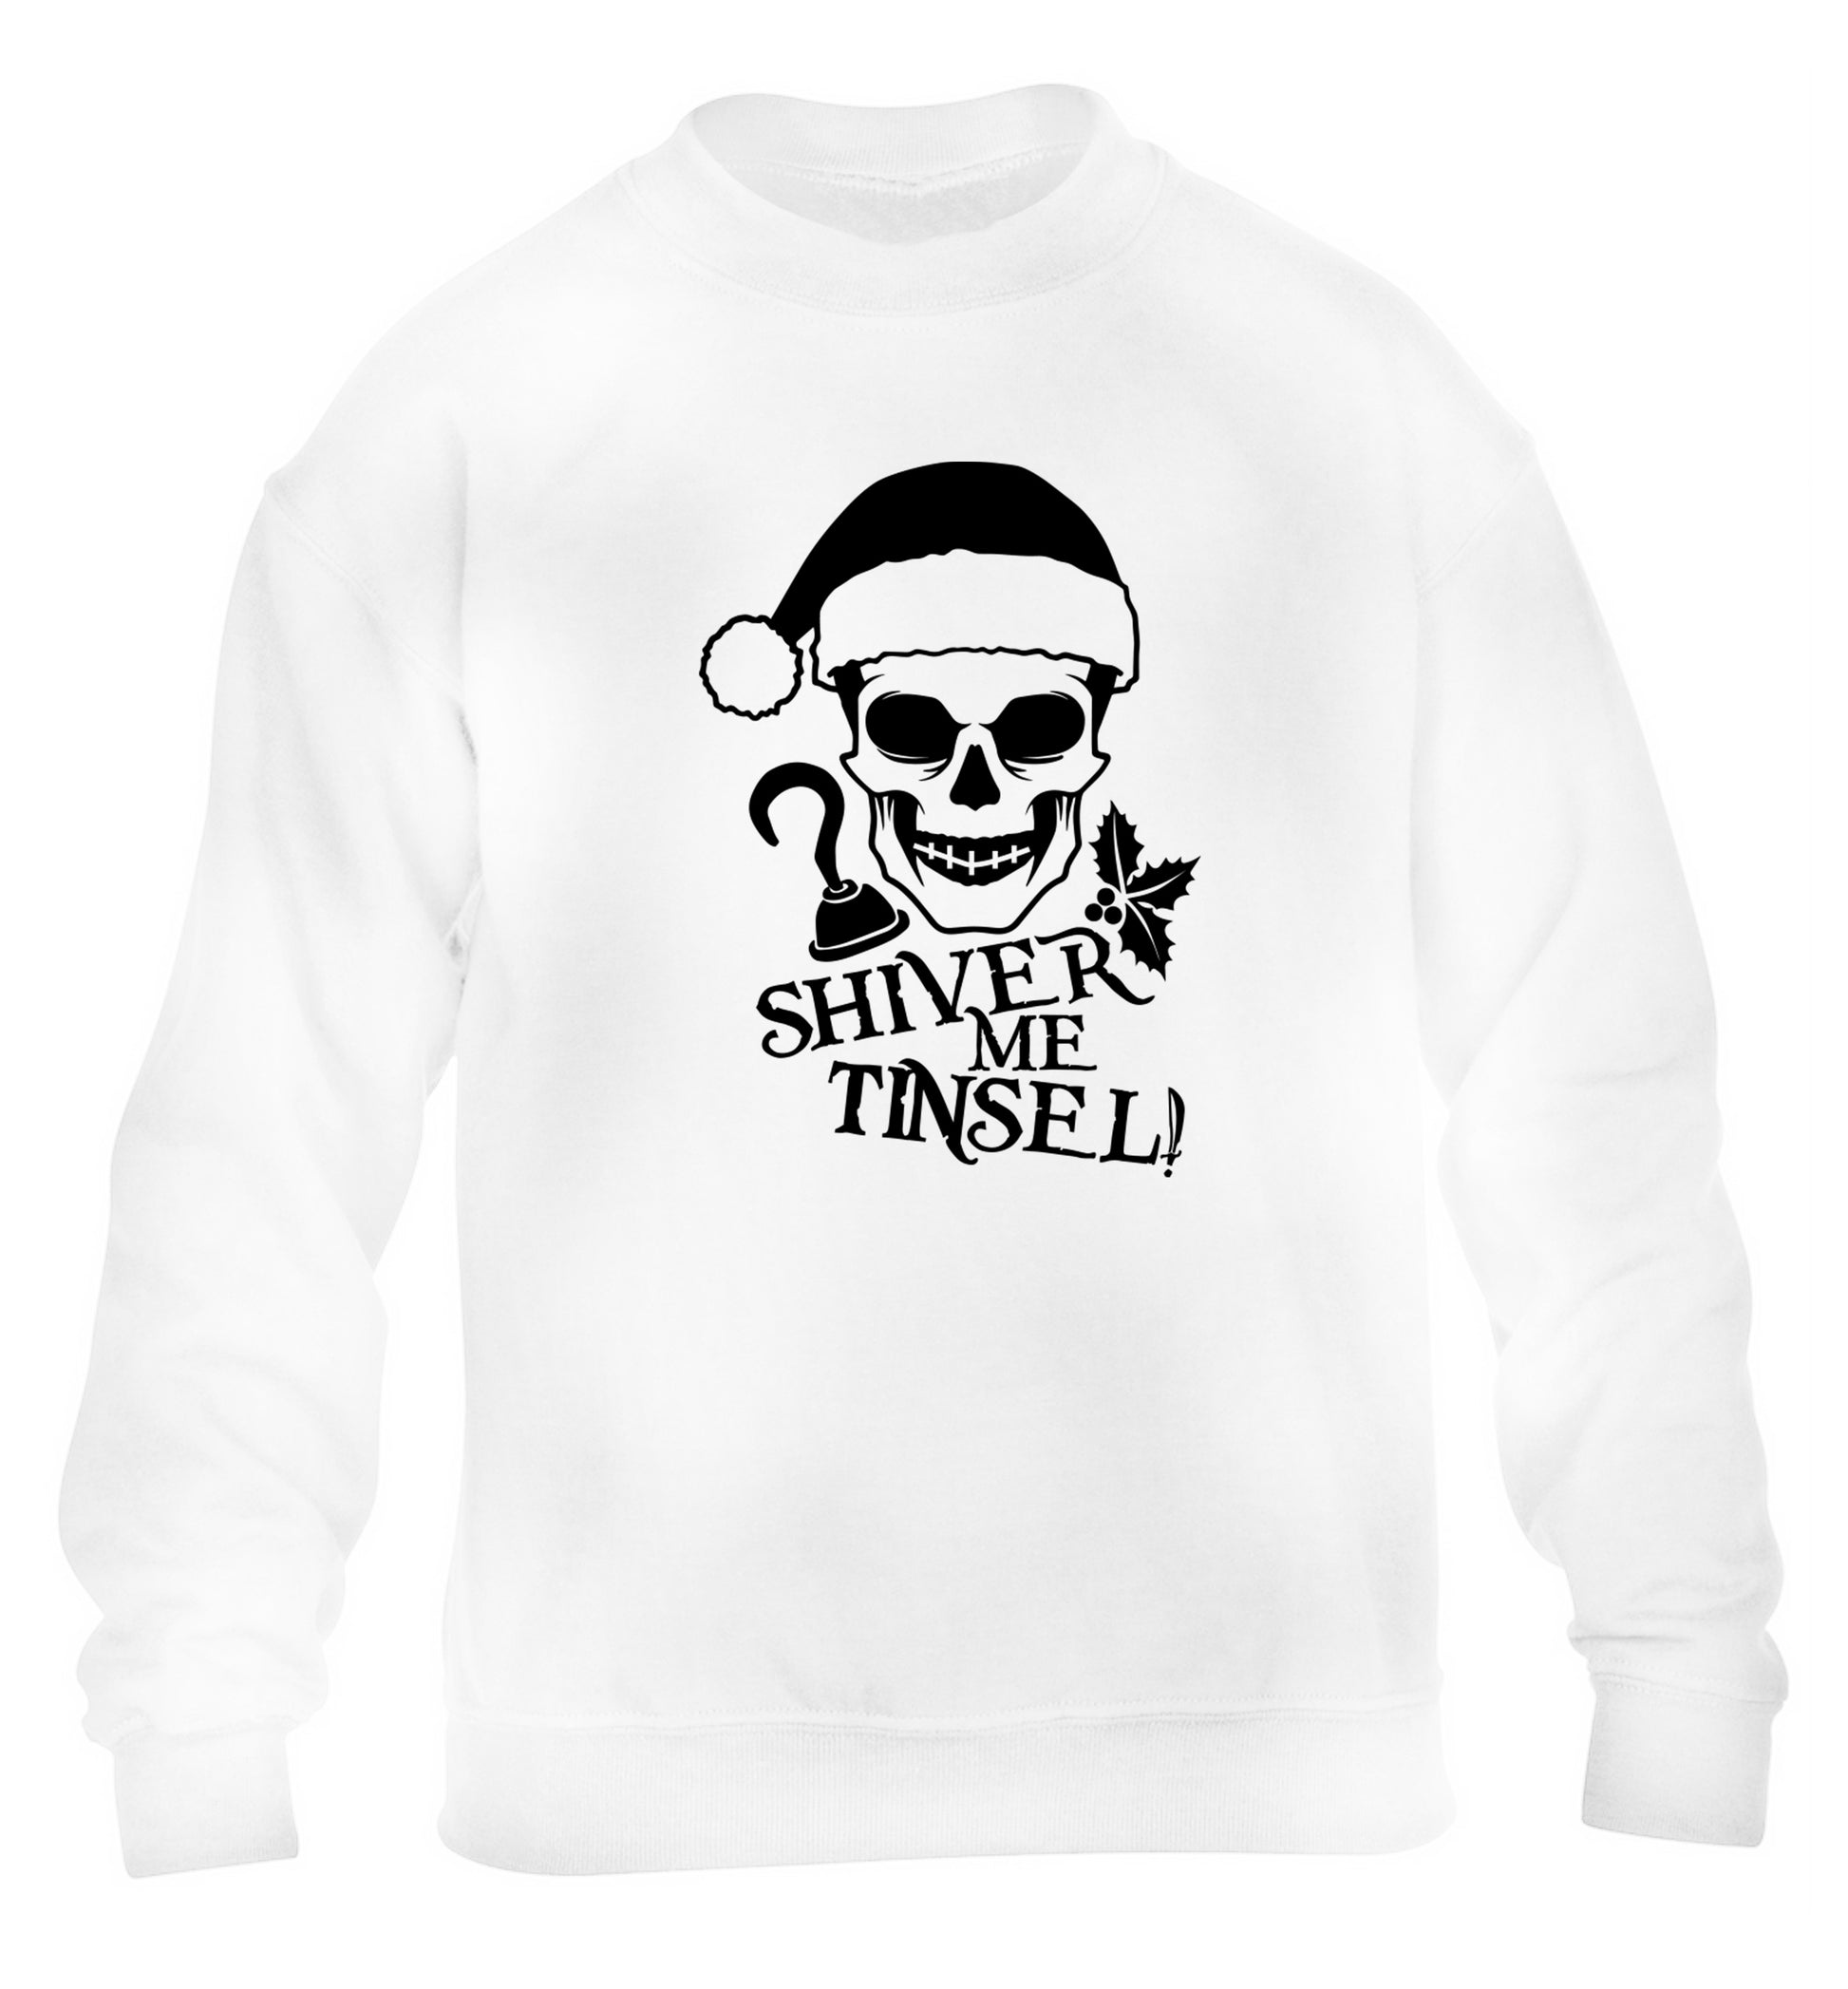 Shiver me tinsel children's white sweater 12-14 Years